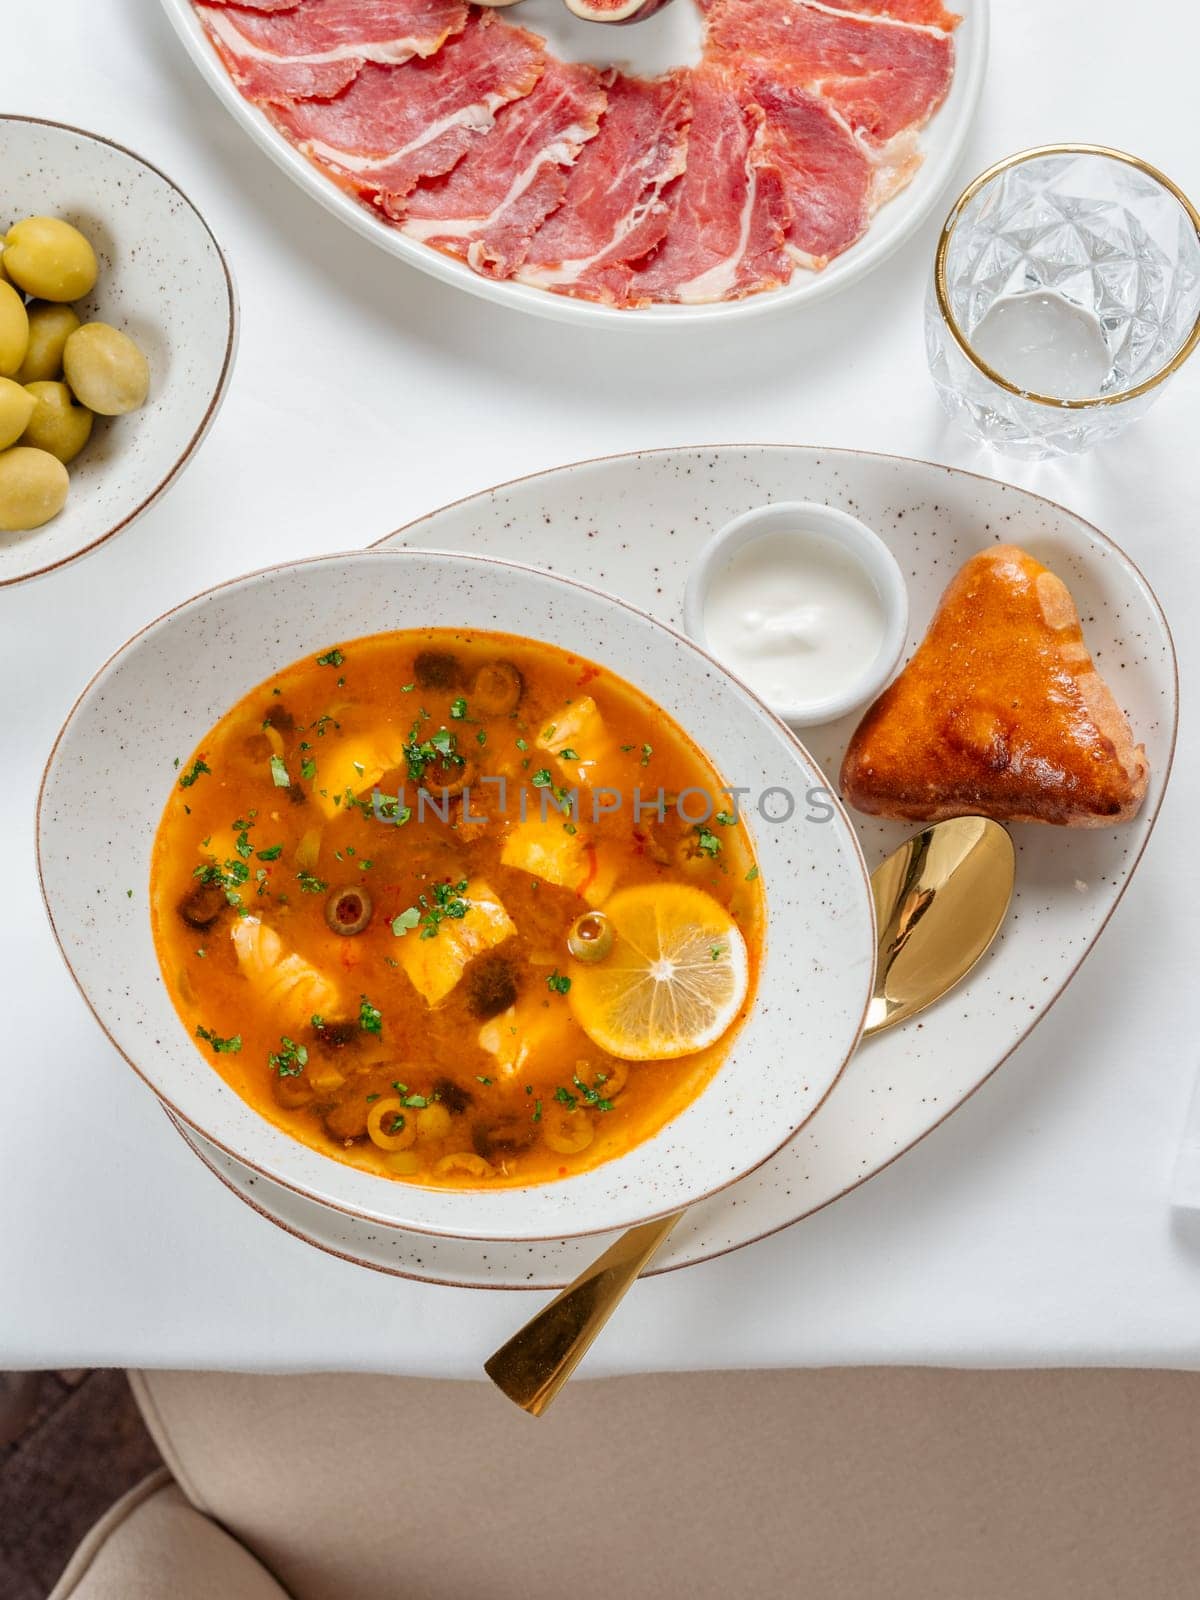 Solyanka soup with meat and olives garnished with a slice of lemon. Traditional Russian meat soup Solyanka in bowl on restaurant table. Top view or flat lay.